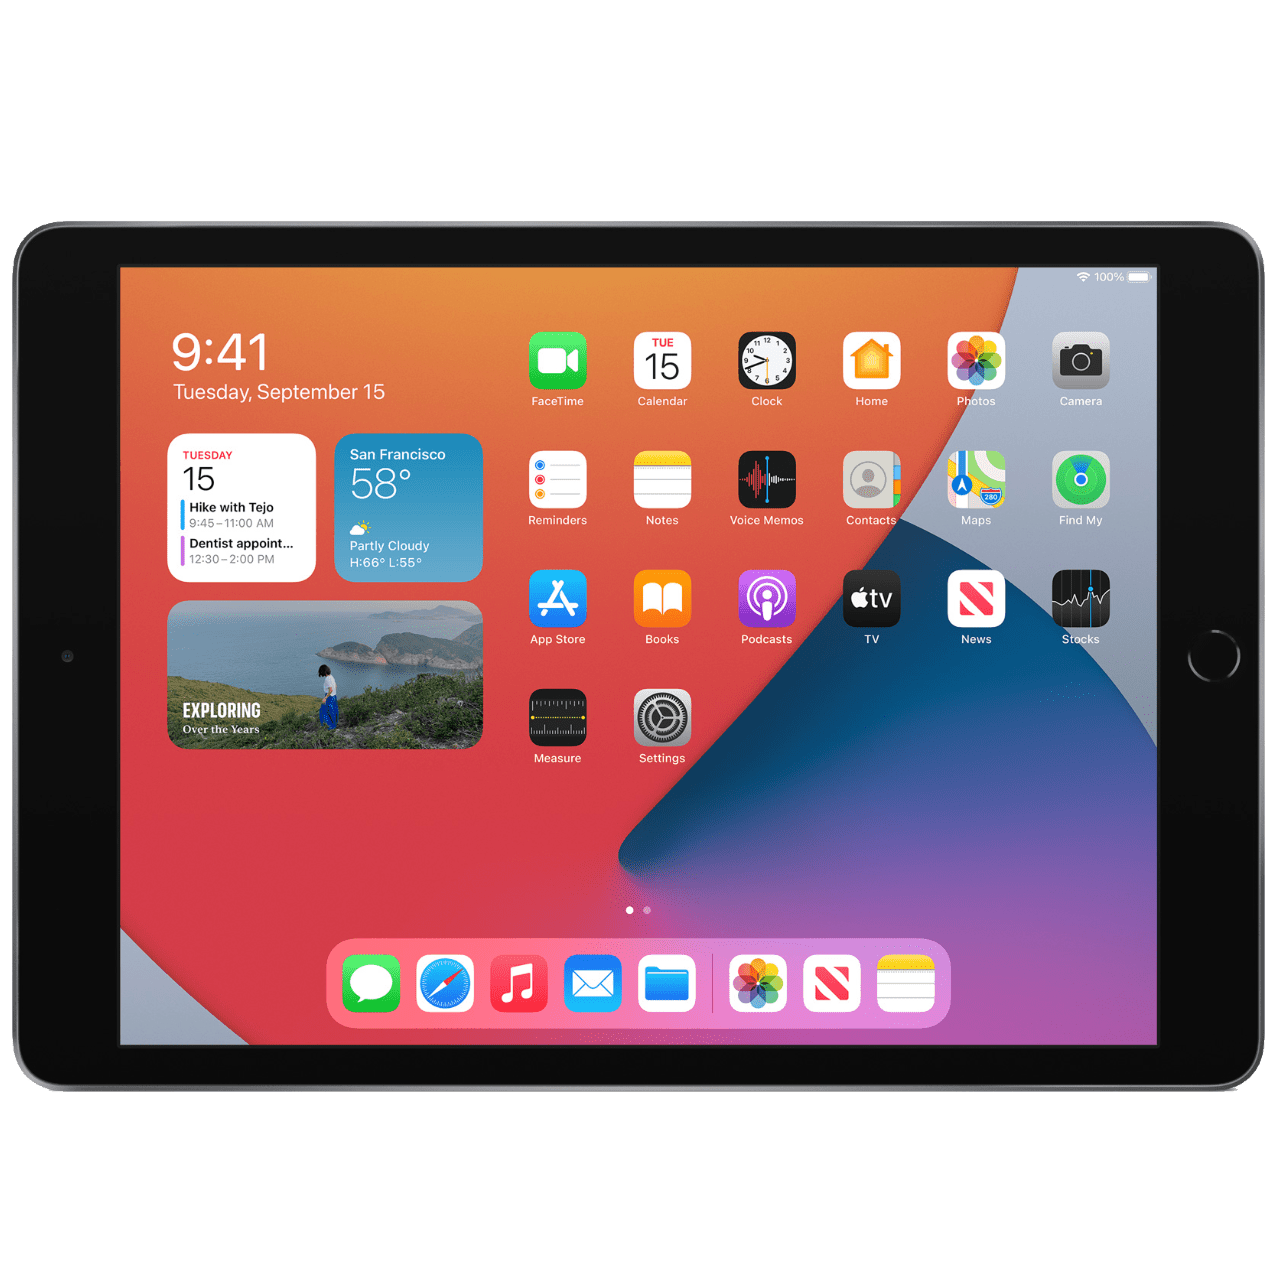 https://images.frandroid.com/wp-content/uploads/2020/09/apple-ipad-8-2020-frandroid.png